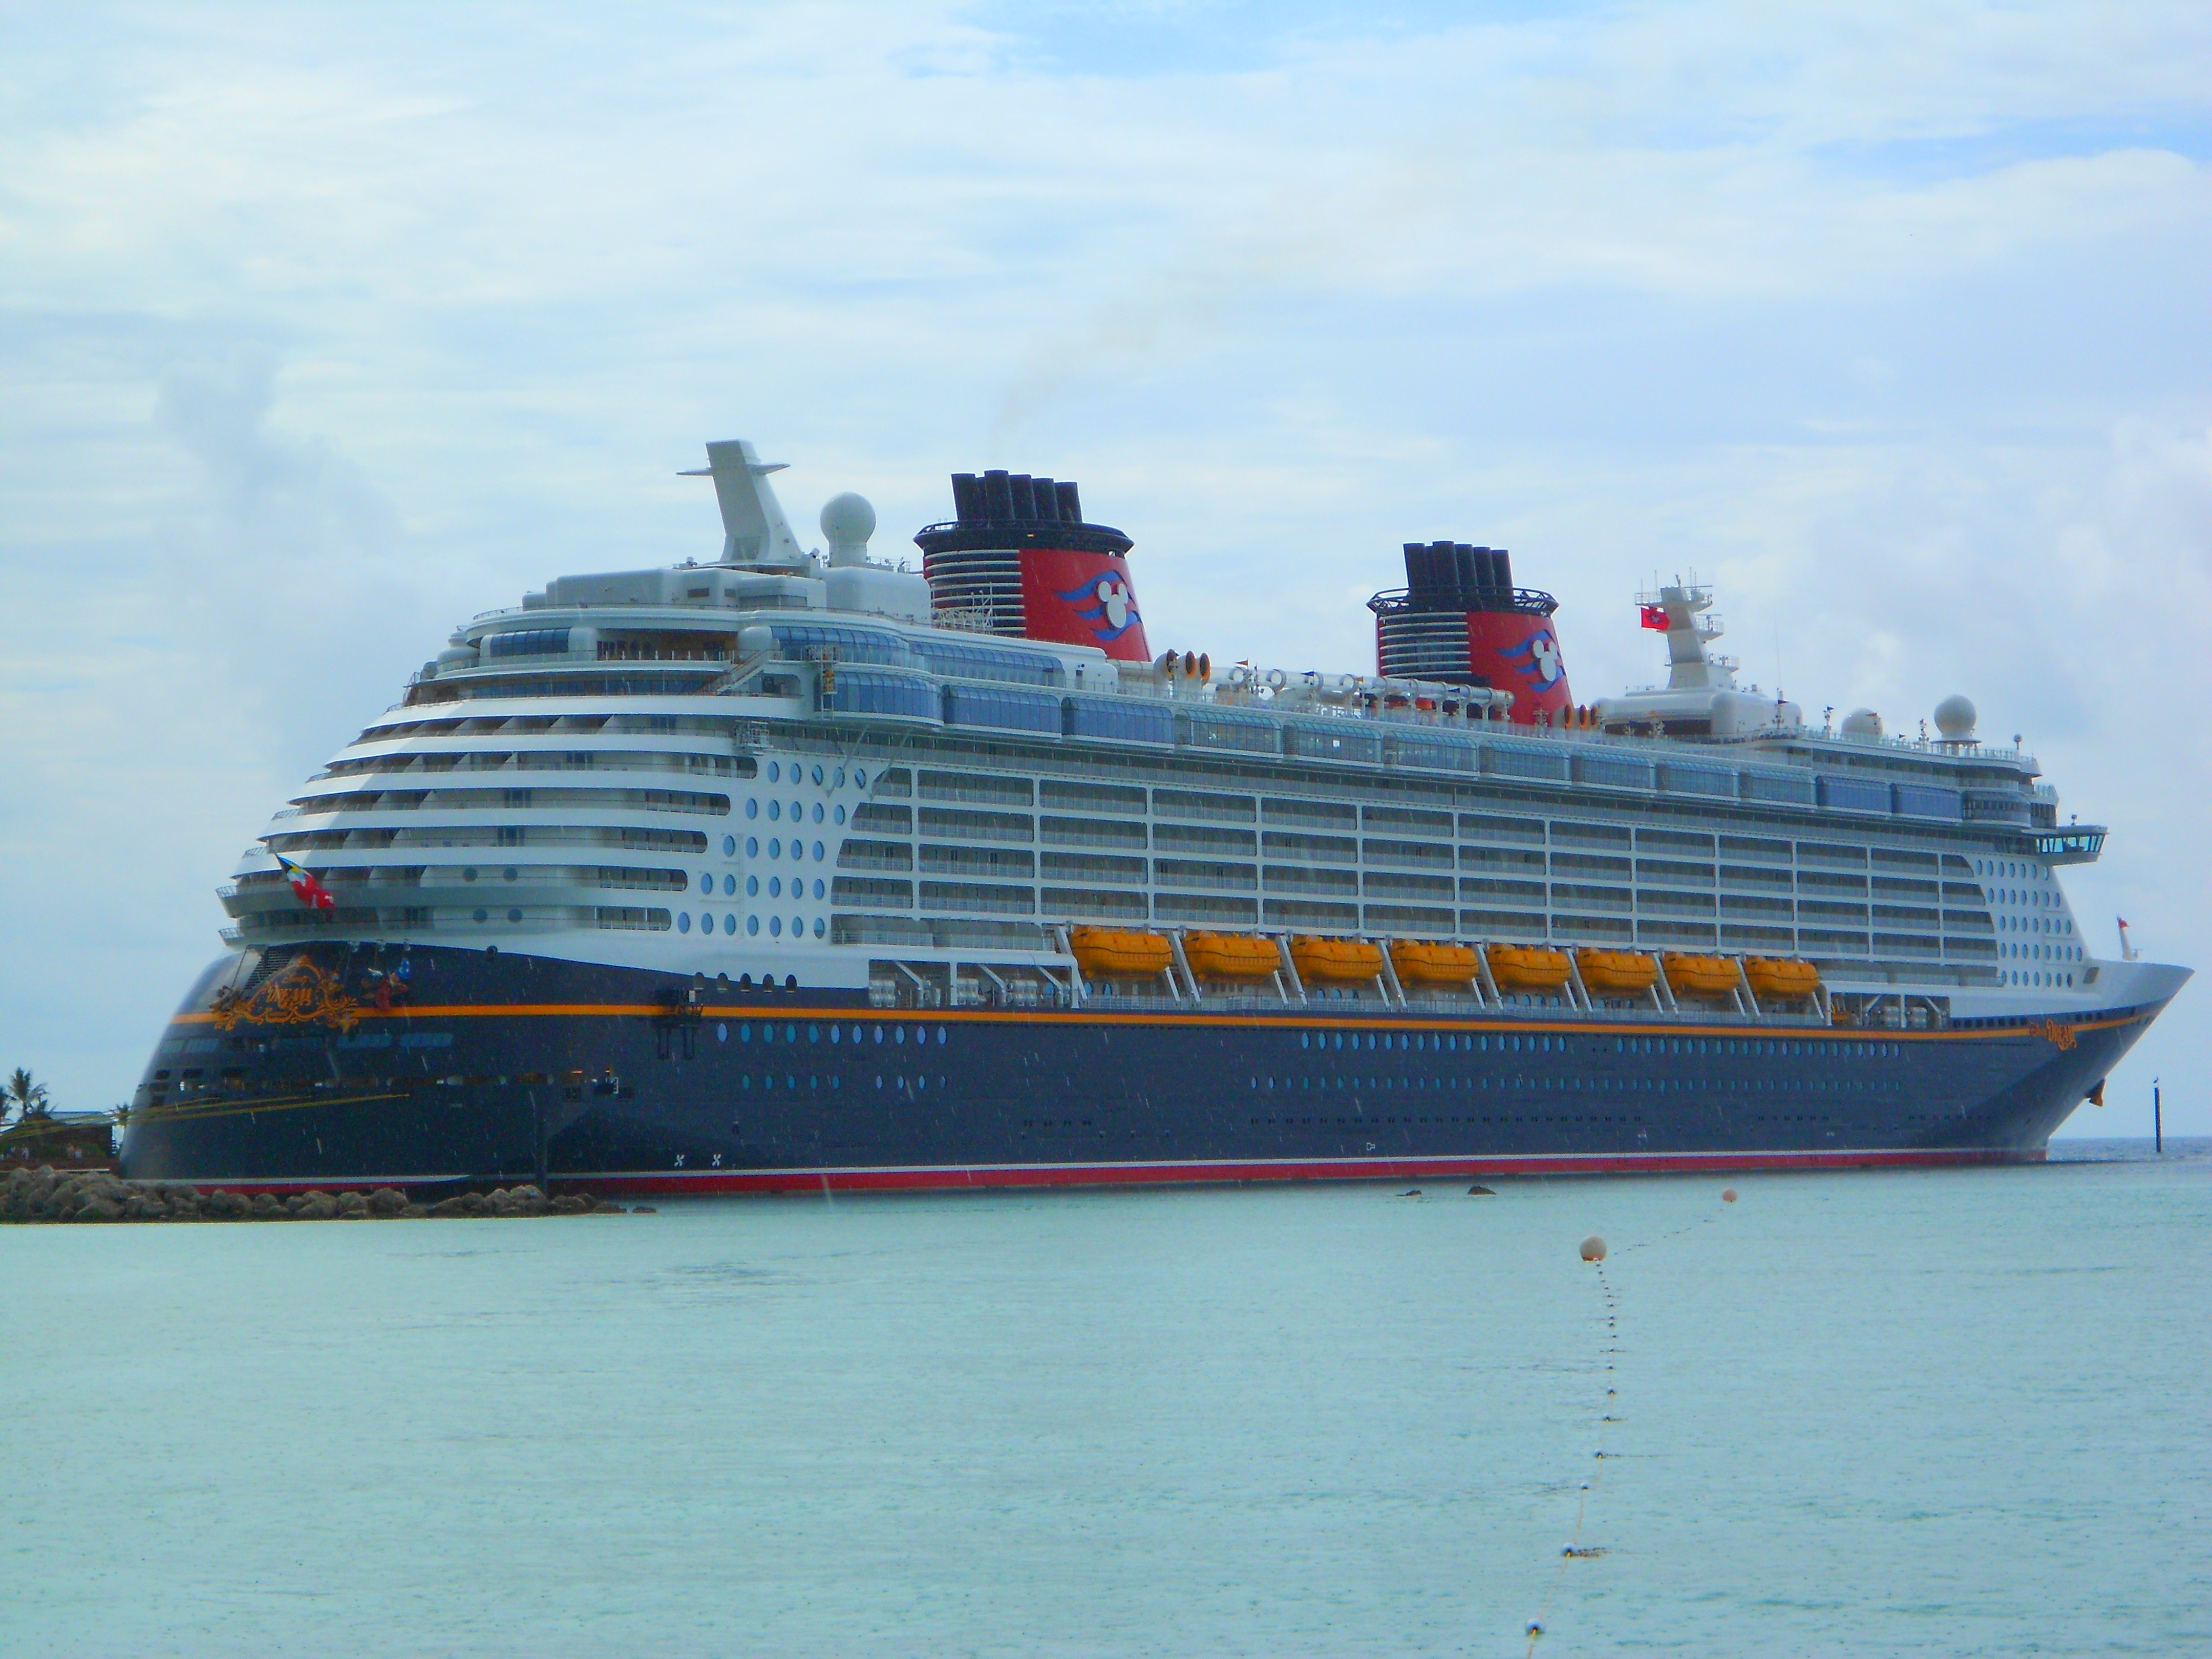 Tips for Getting Autographs on the Disney Cruise Line